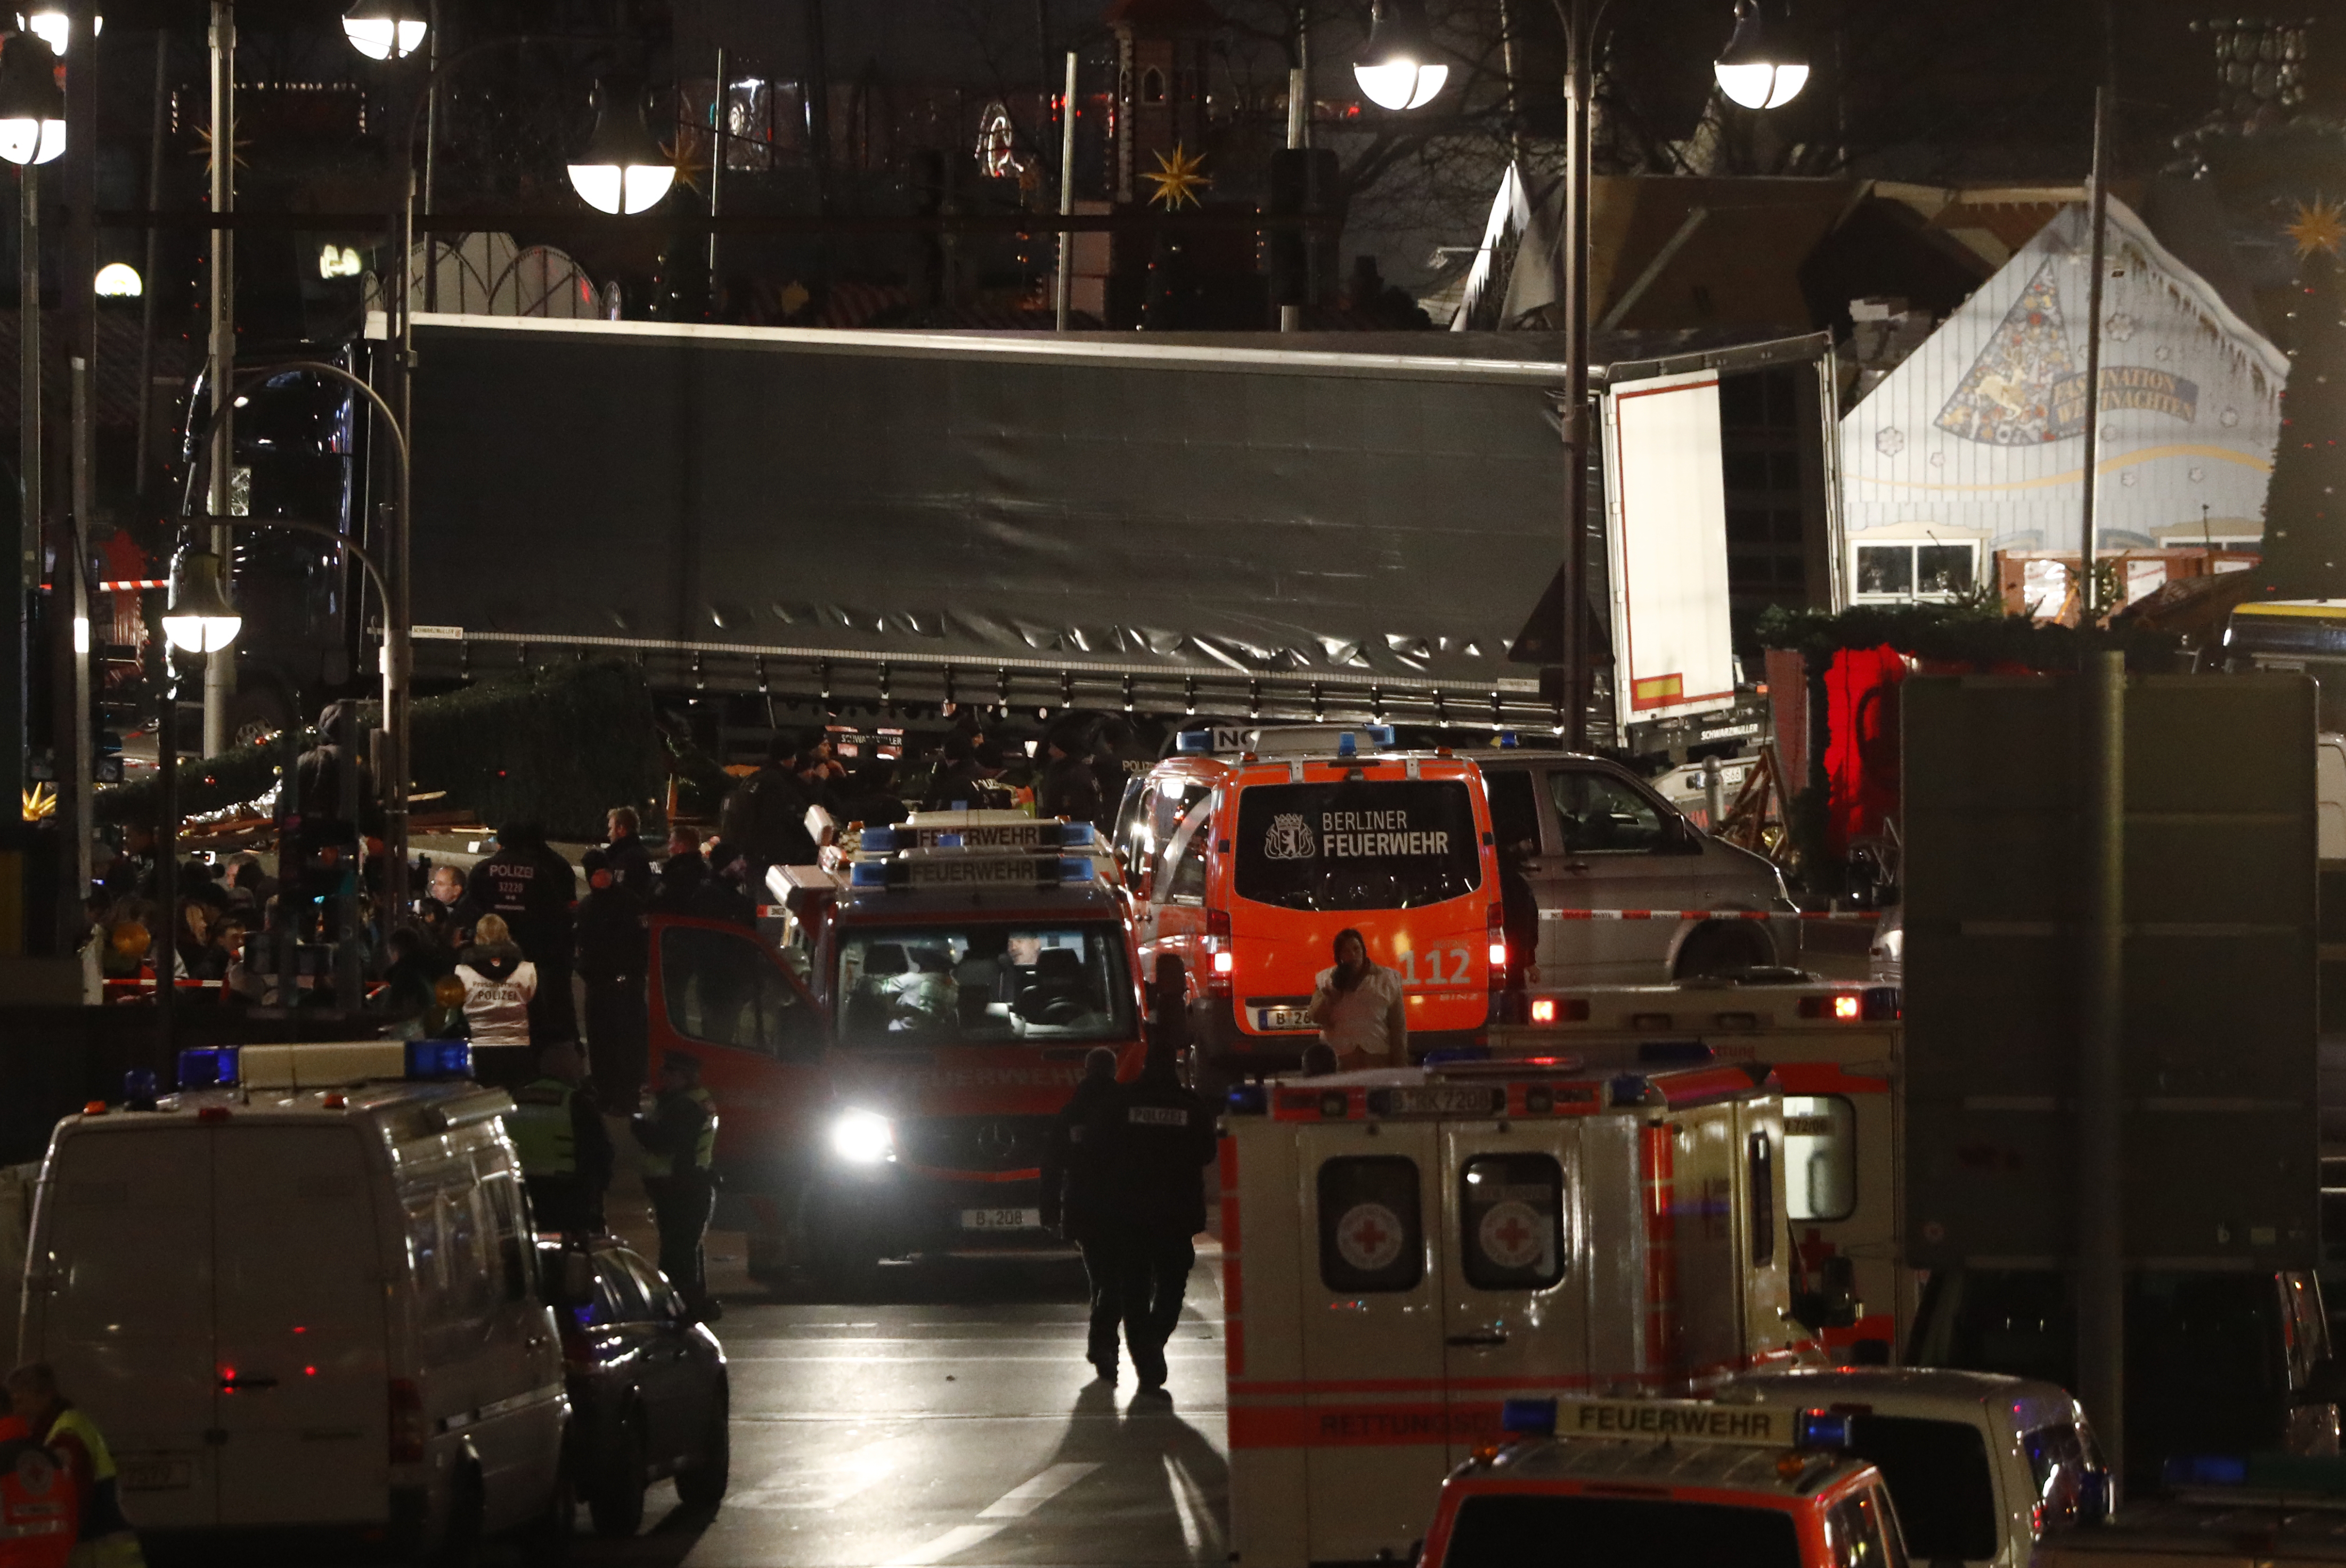 Ambulances stand next to a truck that speeded into a christmas market in Berlin, on December 19, 2016 killing nine persons and injuring at least 50 people. Ambulances and police rushed to the scene after the driver drove up the pavement of the market in a central square popular with tourists less than a week before Christmas, in a scene reminiscent of the deadly truck attack in Nice. / AFP PHOTO / Odd ANDERSEN